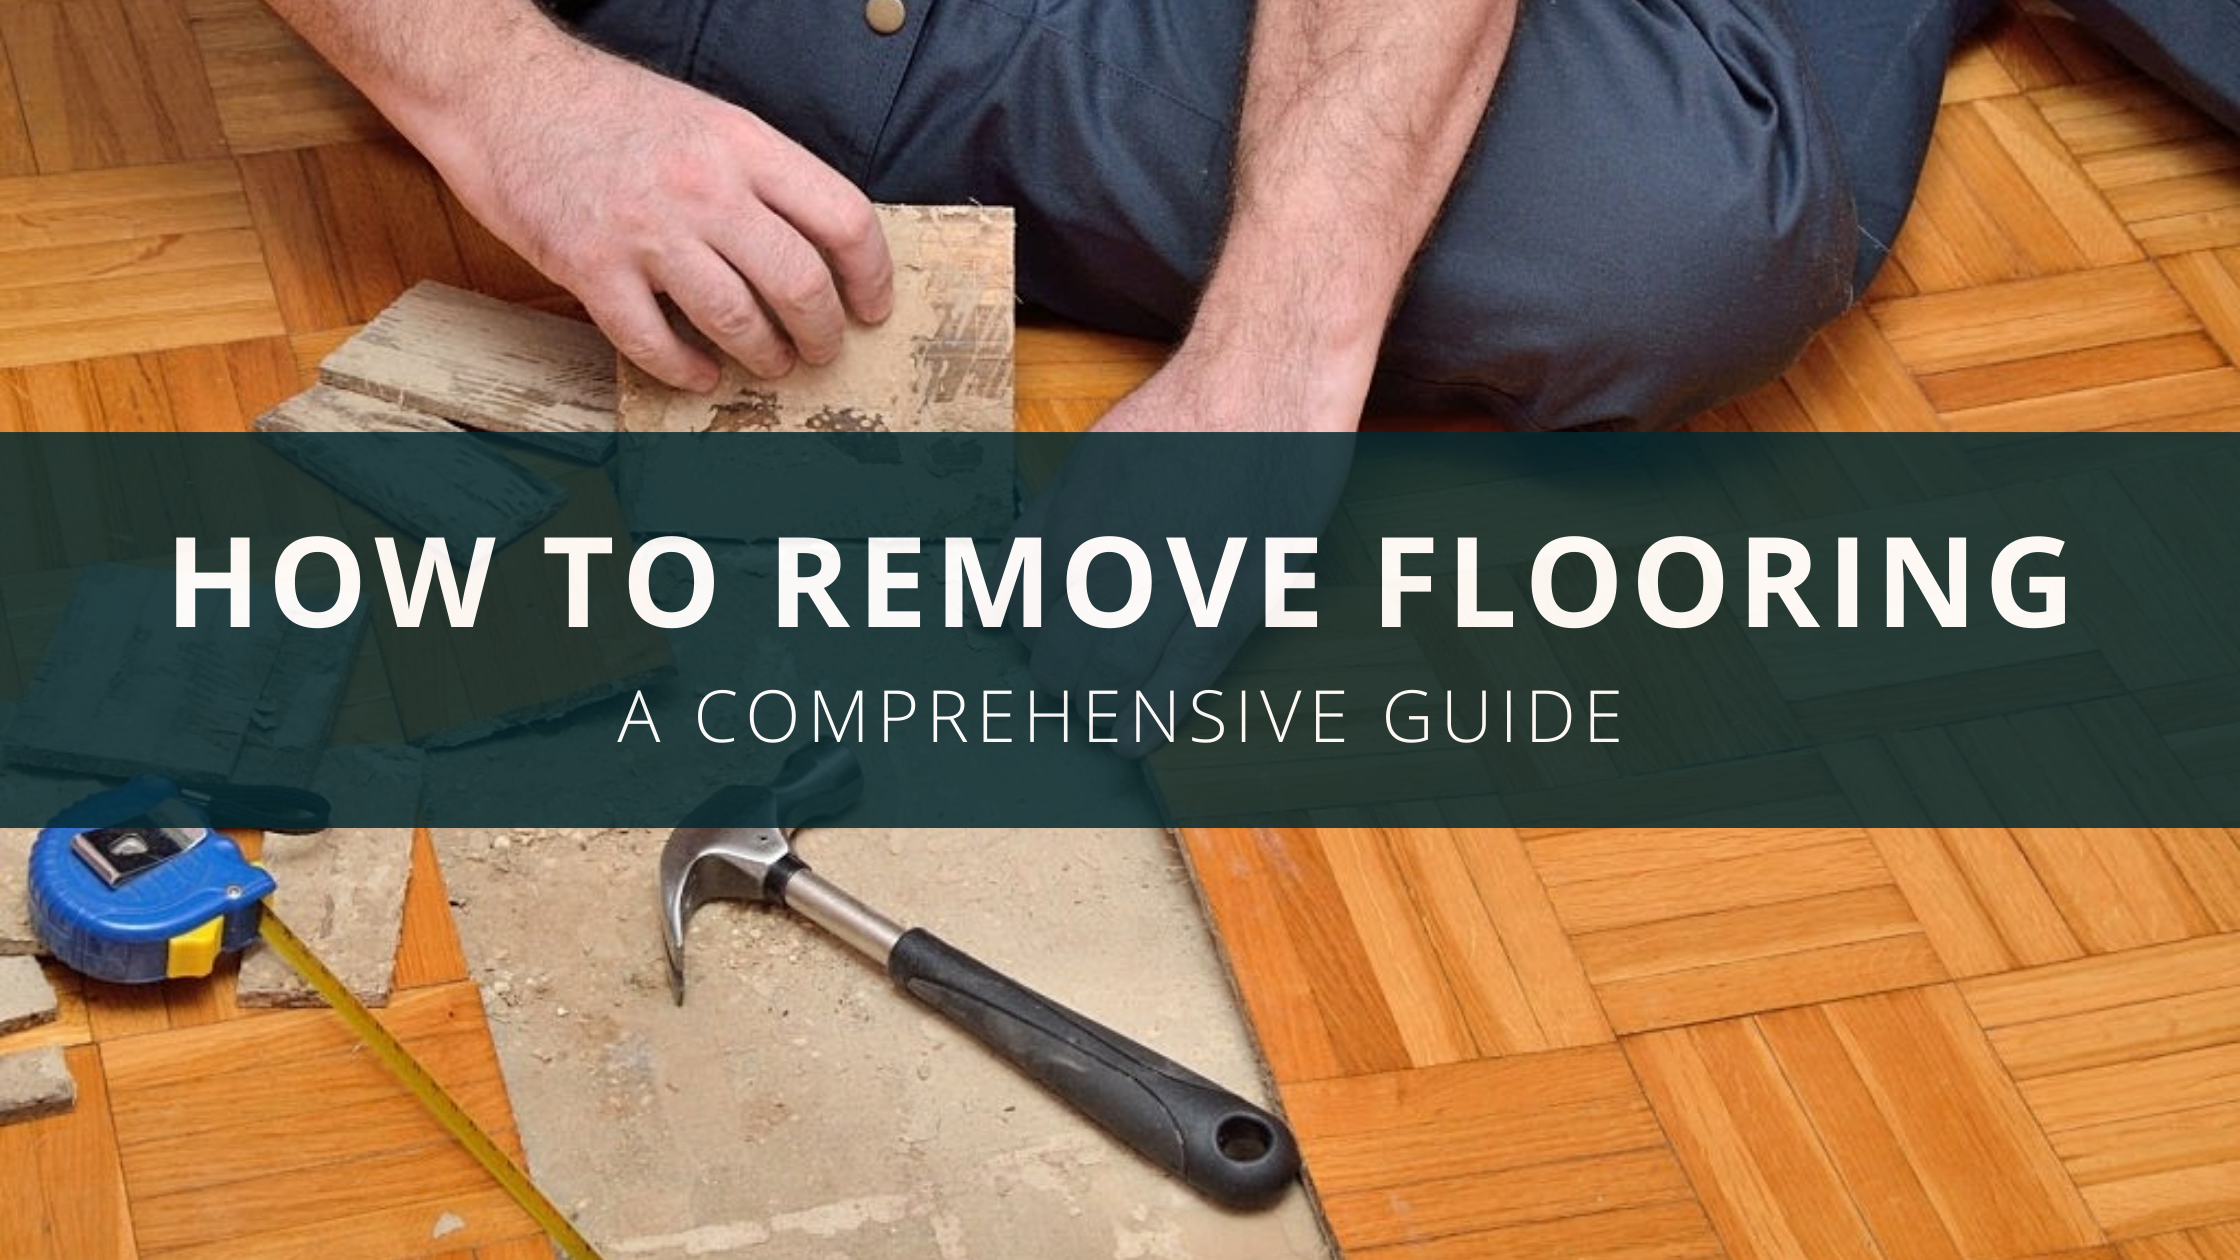 https://discountdumpsterco.com/wp-content/uploads/A-Comprehensive-guide-to-flooring-removal.png